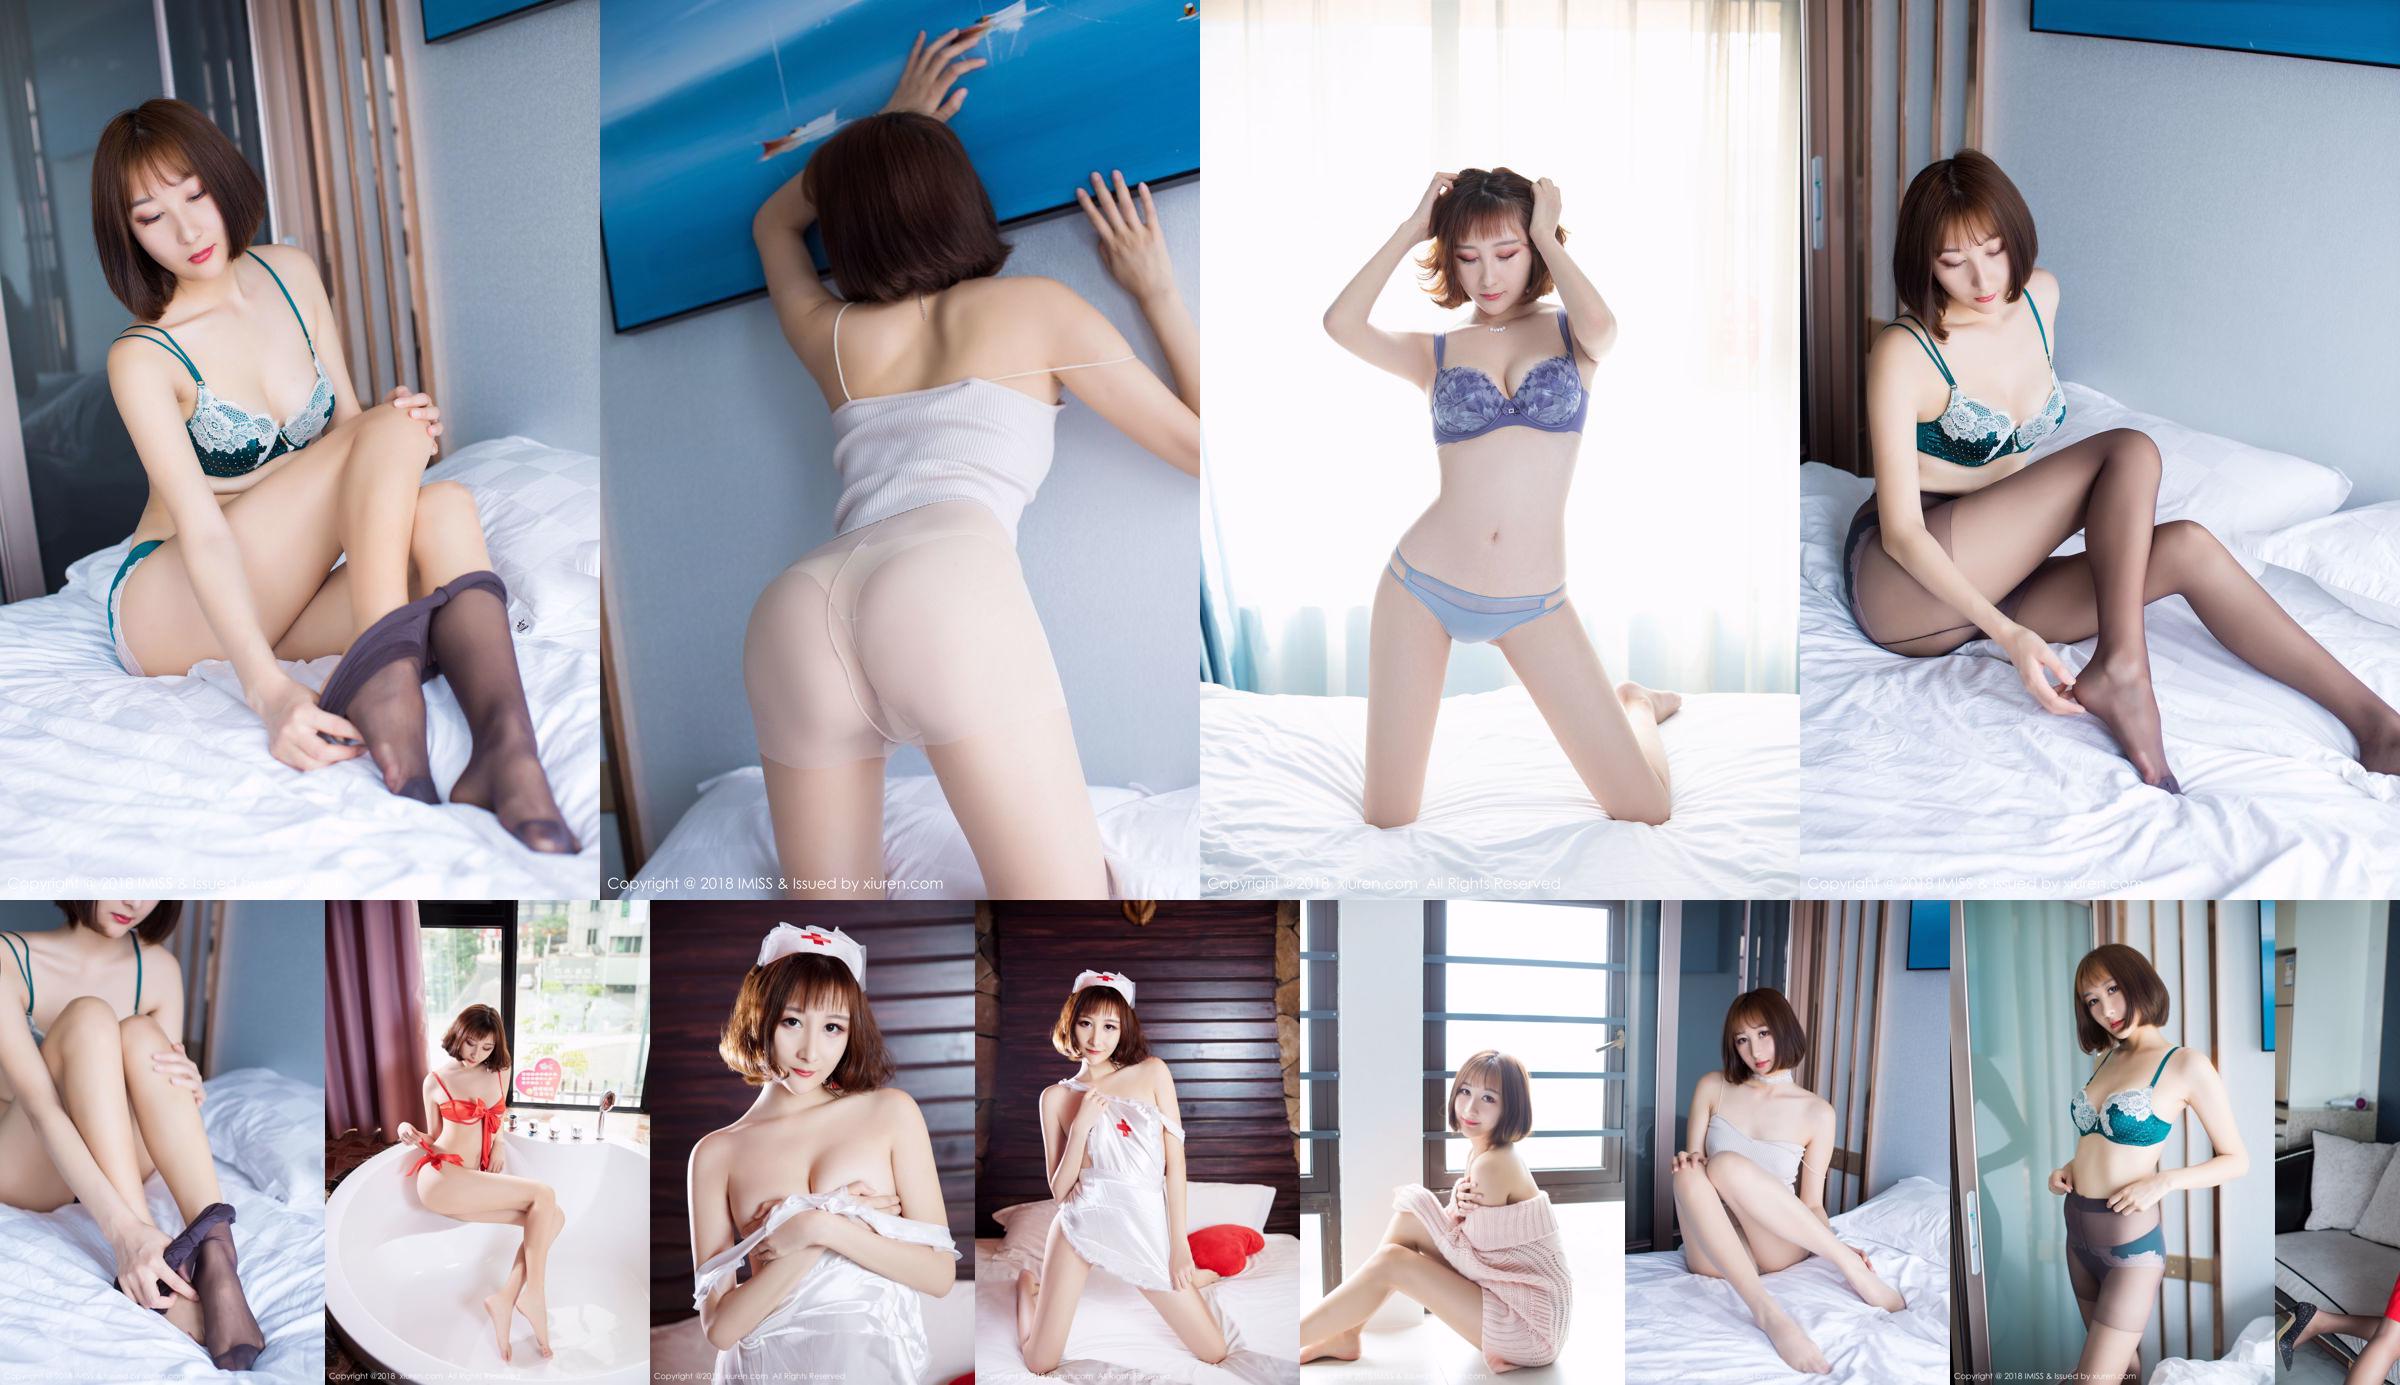 Model @ 九尾 Ivy- "Der ultimative private Charme" [秀 人 XIUREN] Nr.1046 No.548183 Seite 1